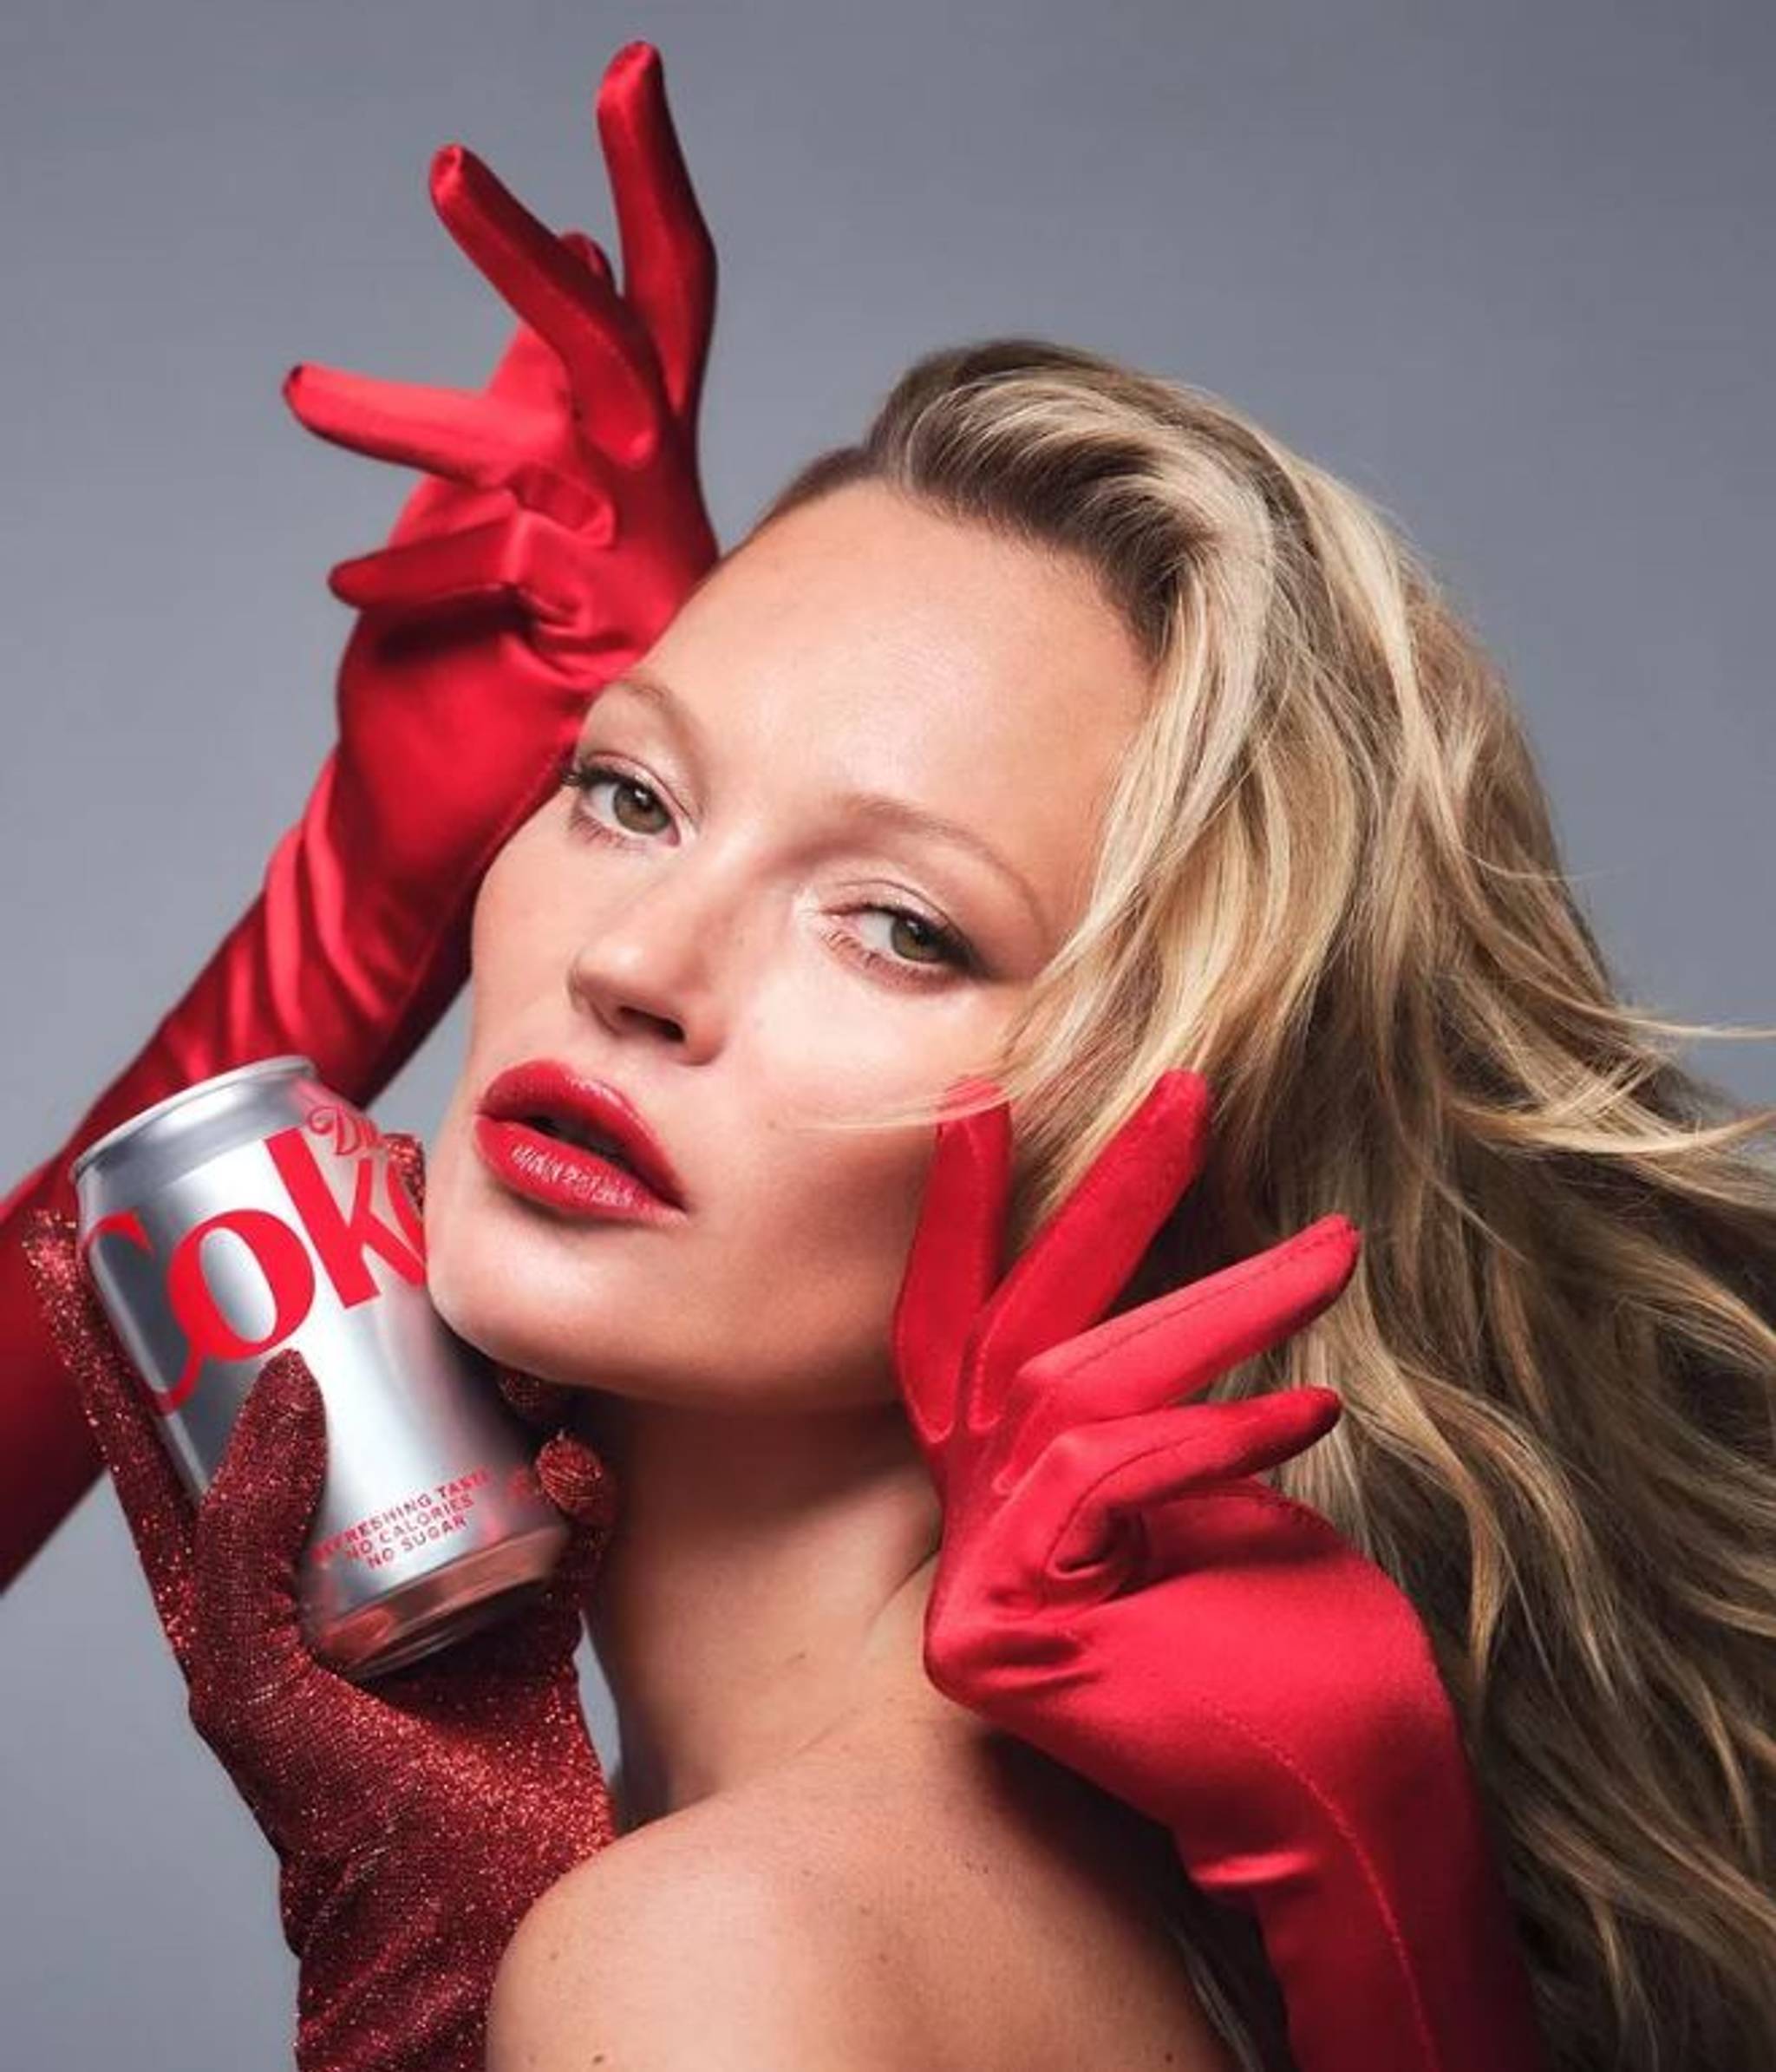 Kate Moss for Diet Coke uses nostalgia as new narrative